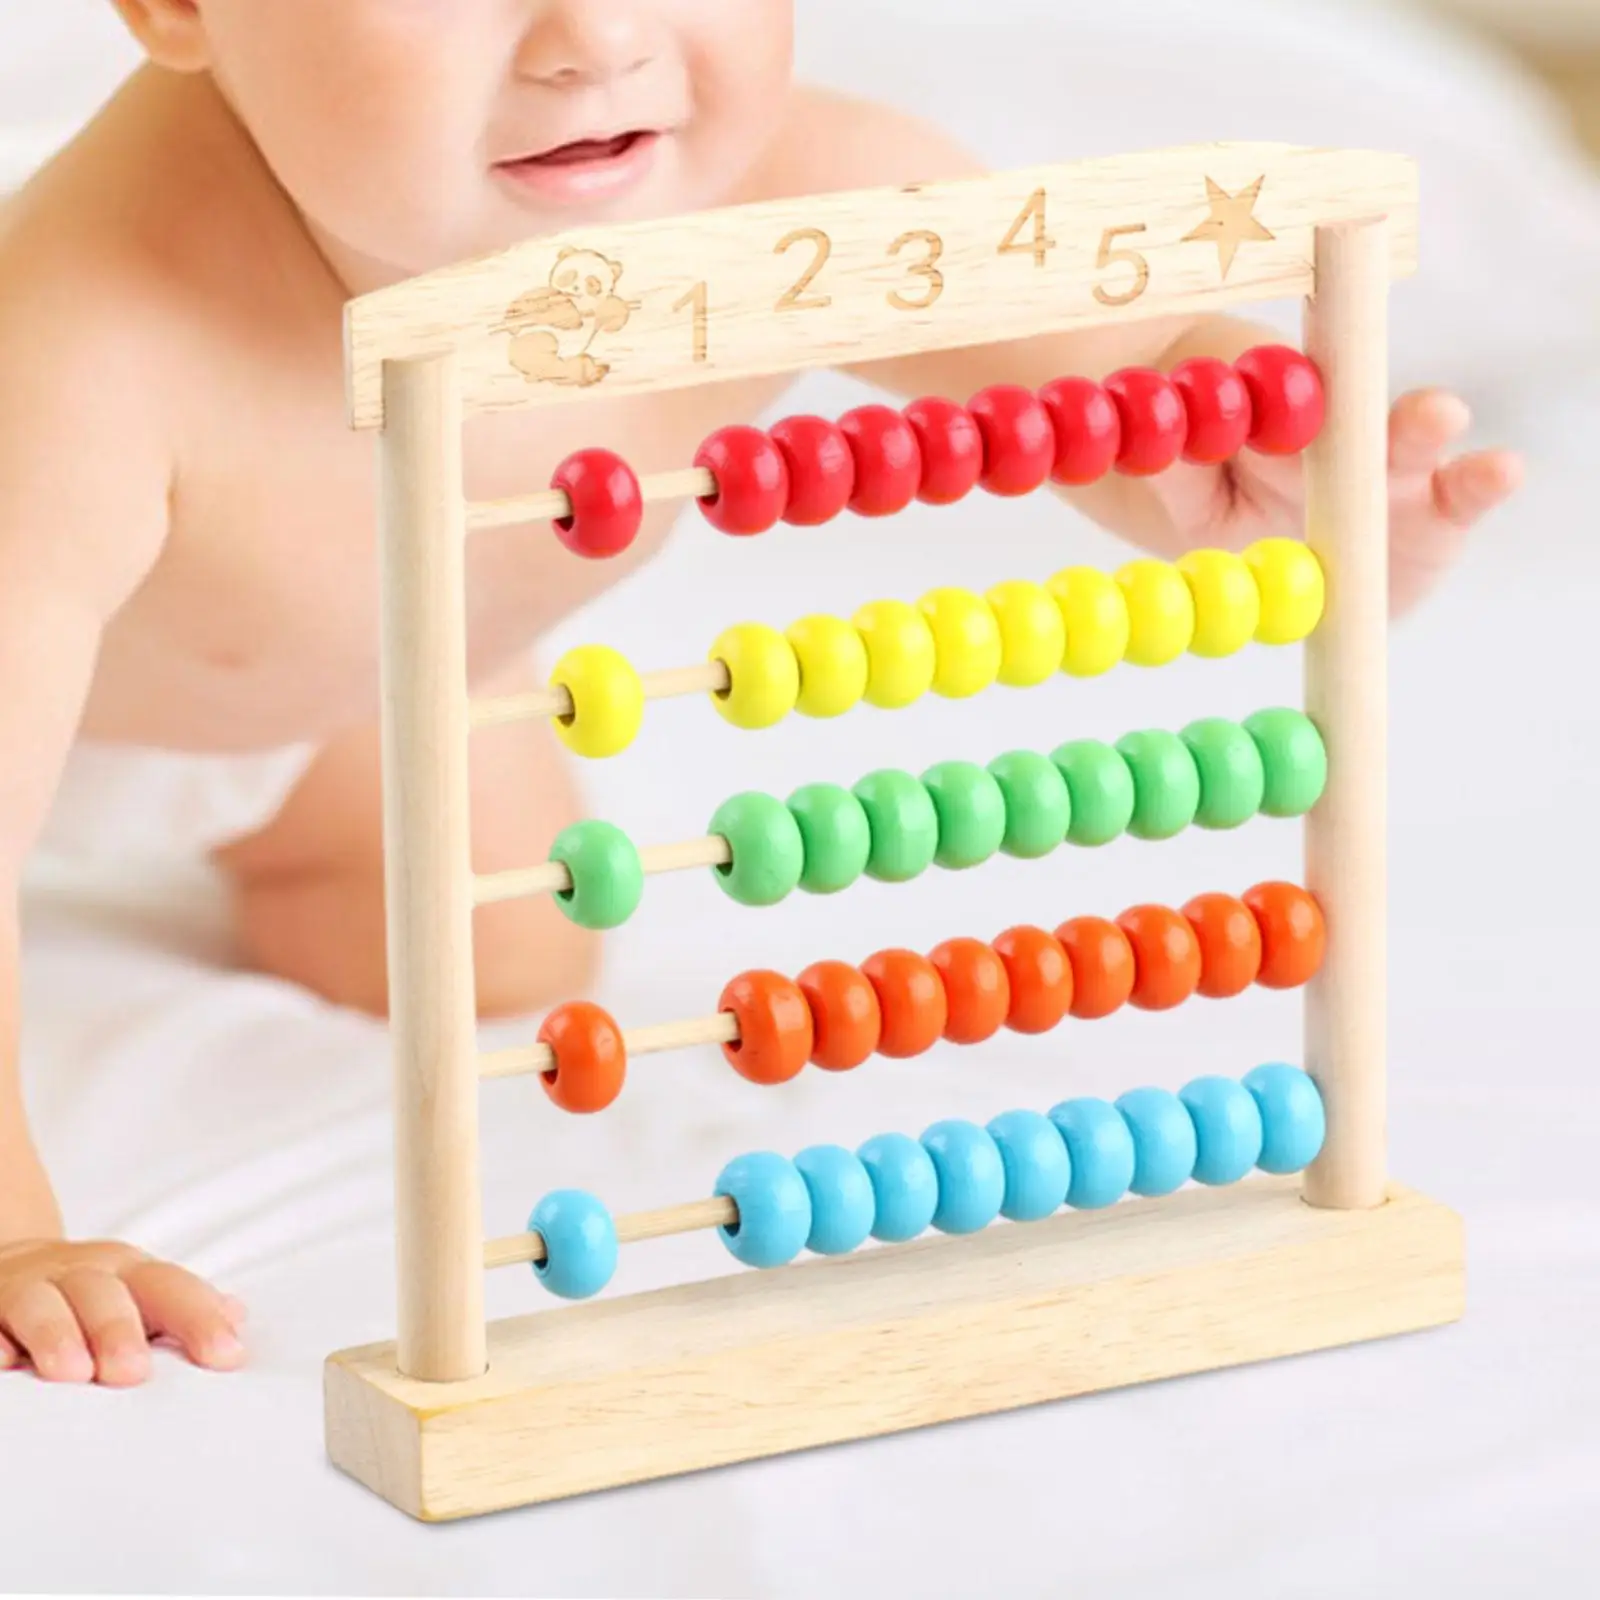 Counting Abacus Toy Wooden Counting Frame Learning, Math Manipulative, Wooden Abacus for Kids, 5 Row Abacus for Kindergarten